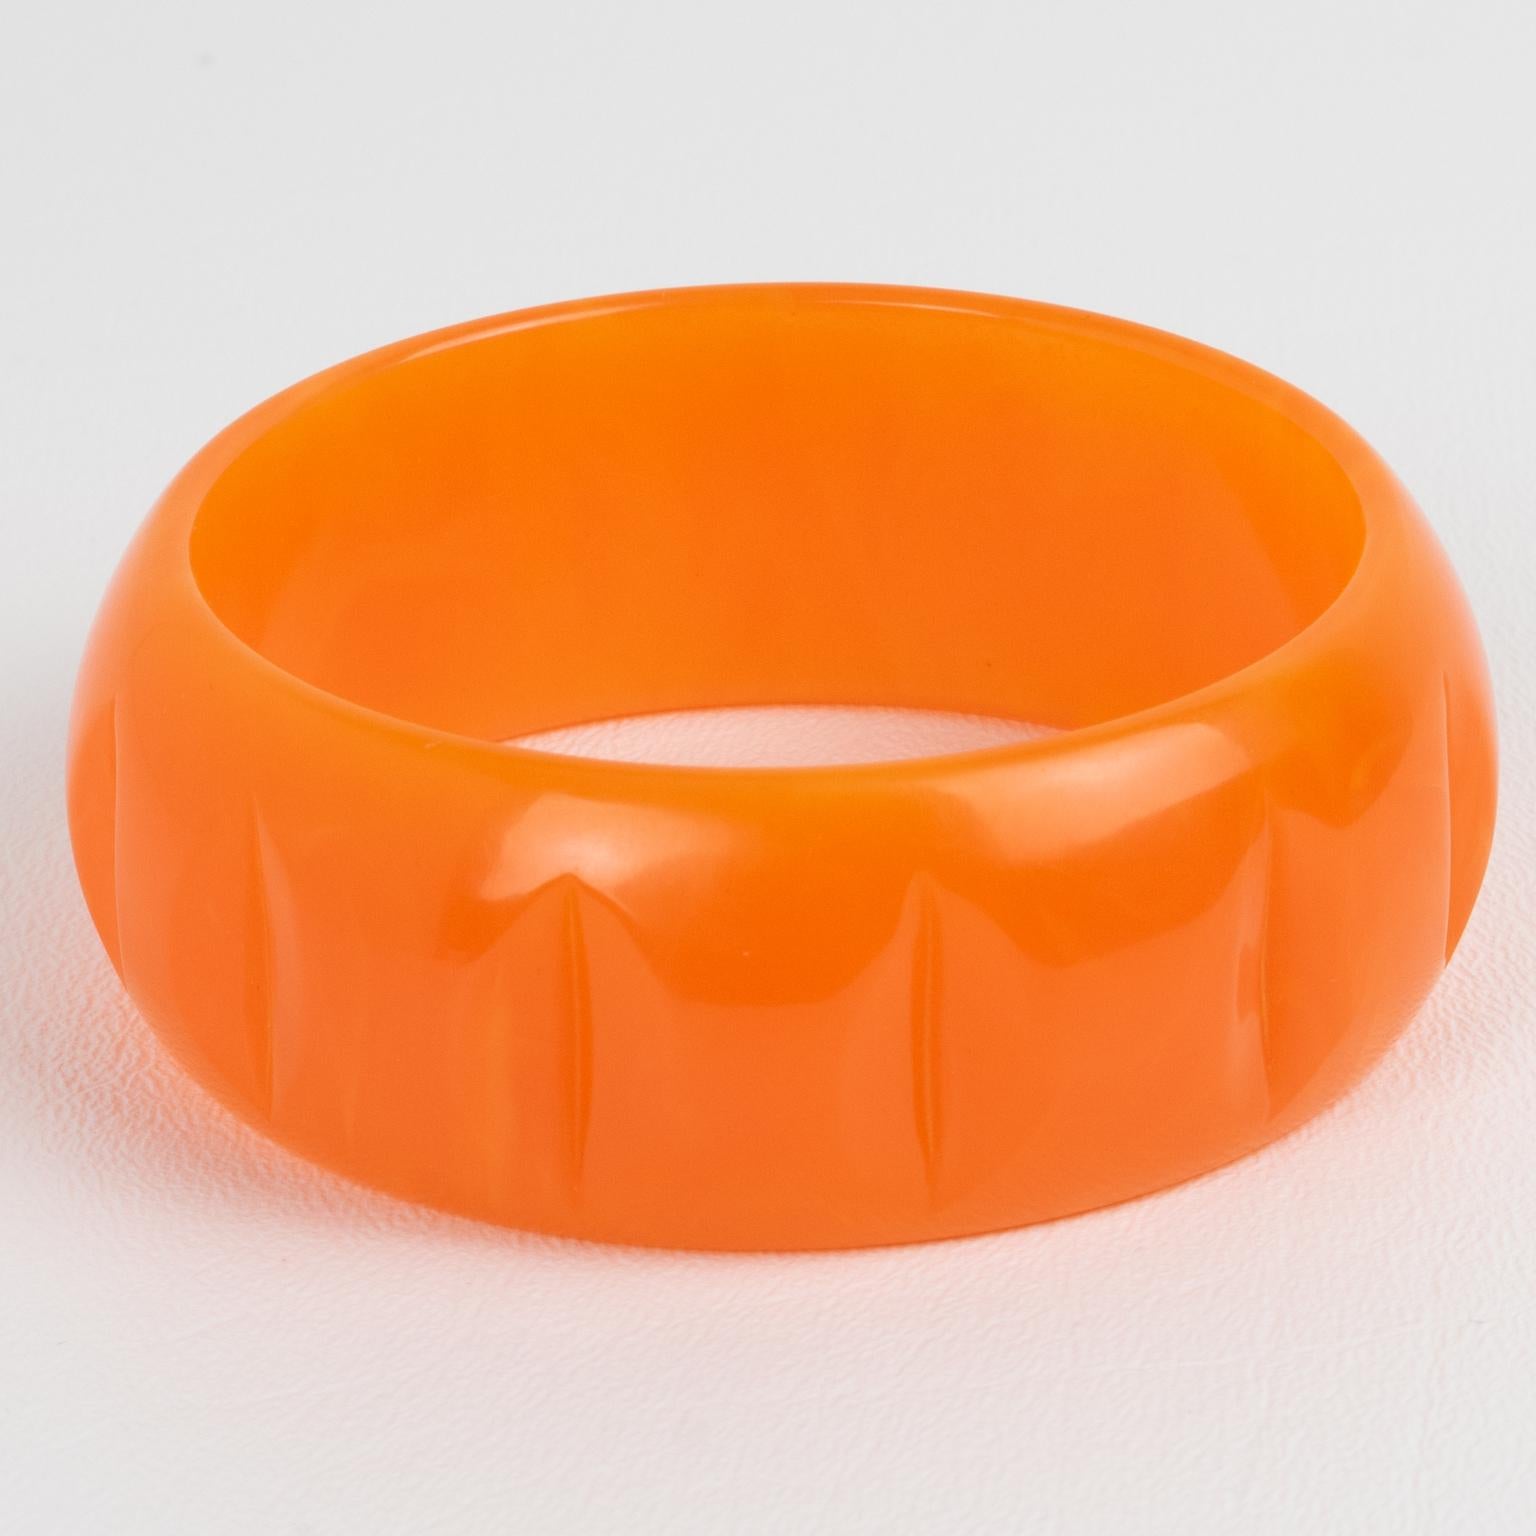 This is a lovely orange tangerine marble Bakelite carved bracelet bangle. It features a chunky domed shape with a carved design all around. The color is an intense sunny orange tone with lighter milky swirling.
Measurements: Inside across 2.57 in